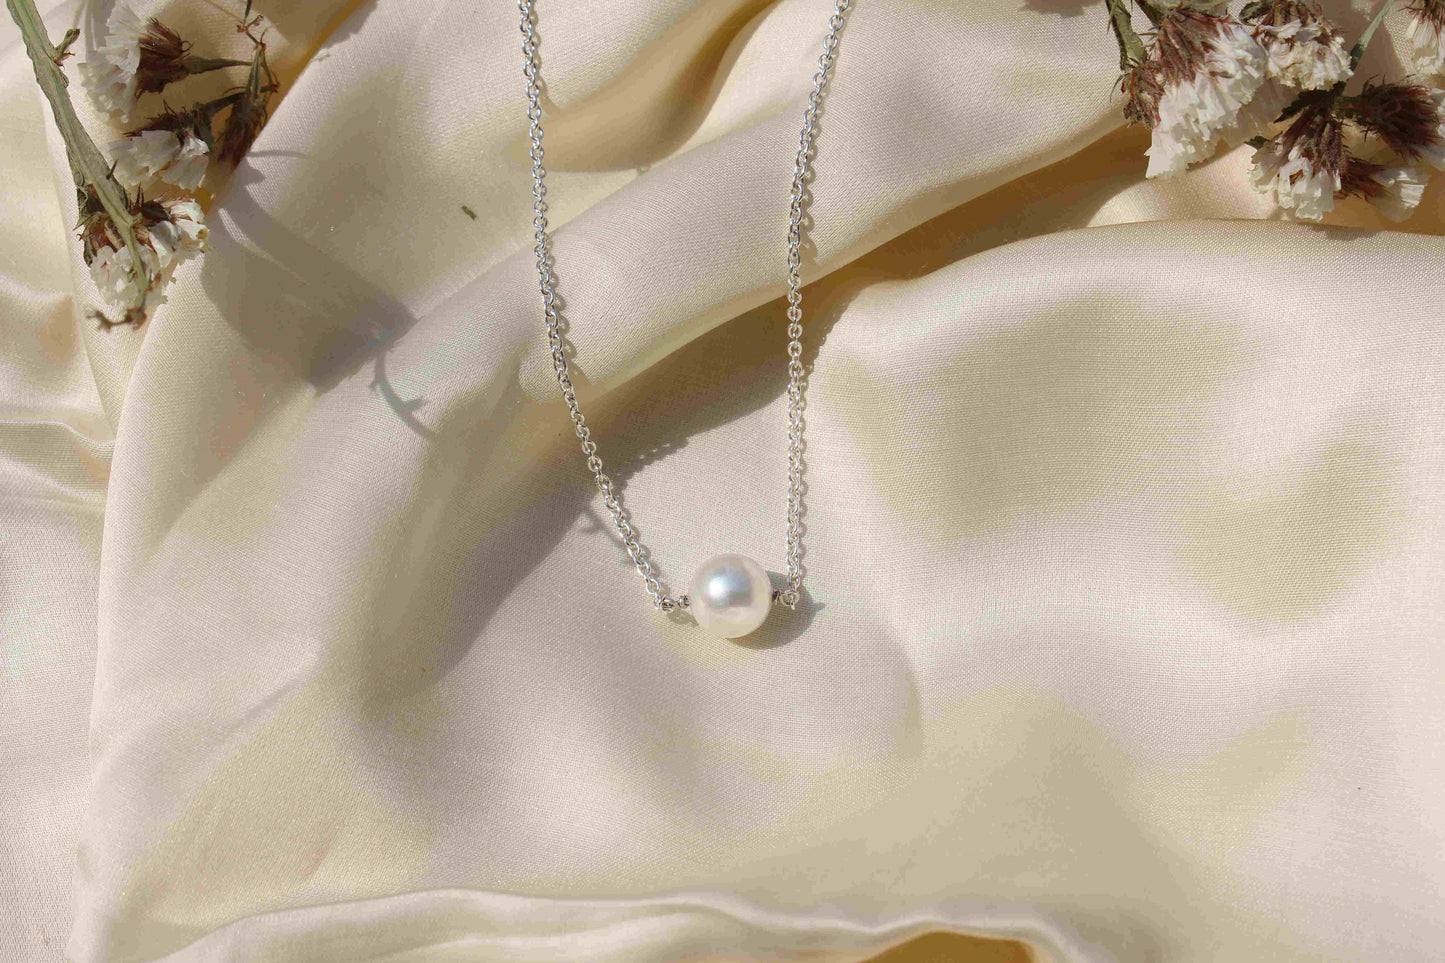 Pearl June Birthstone with Initial Pendant and Chain